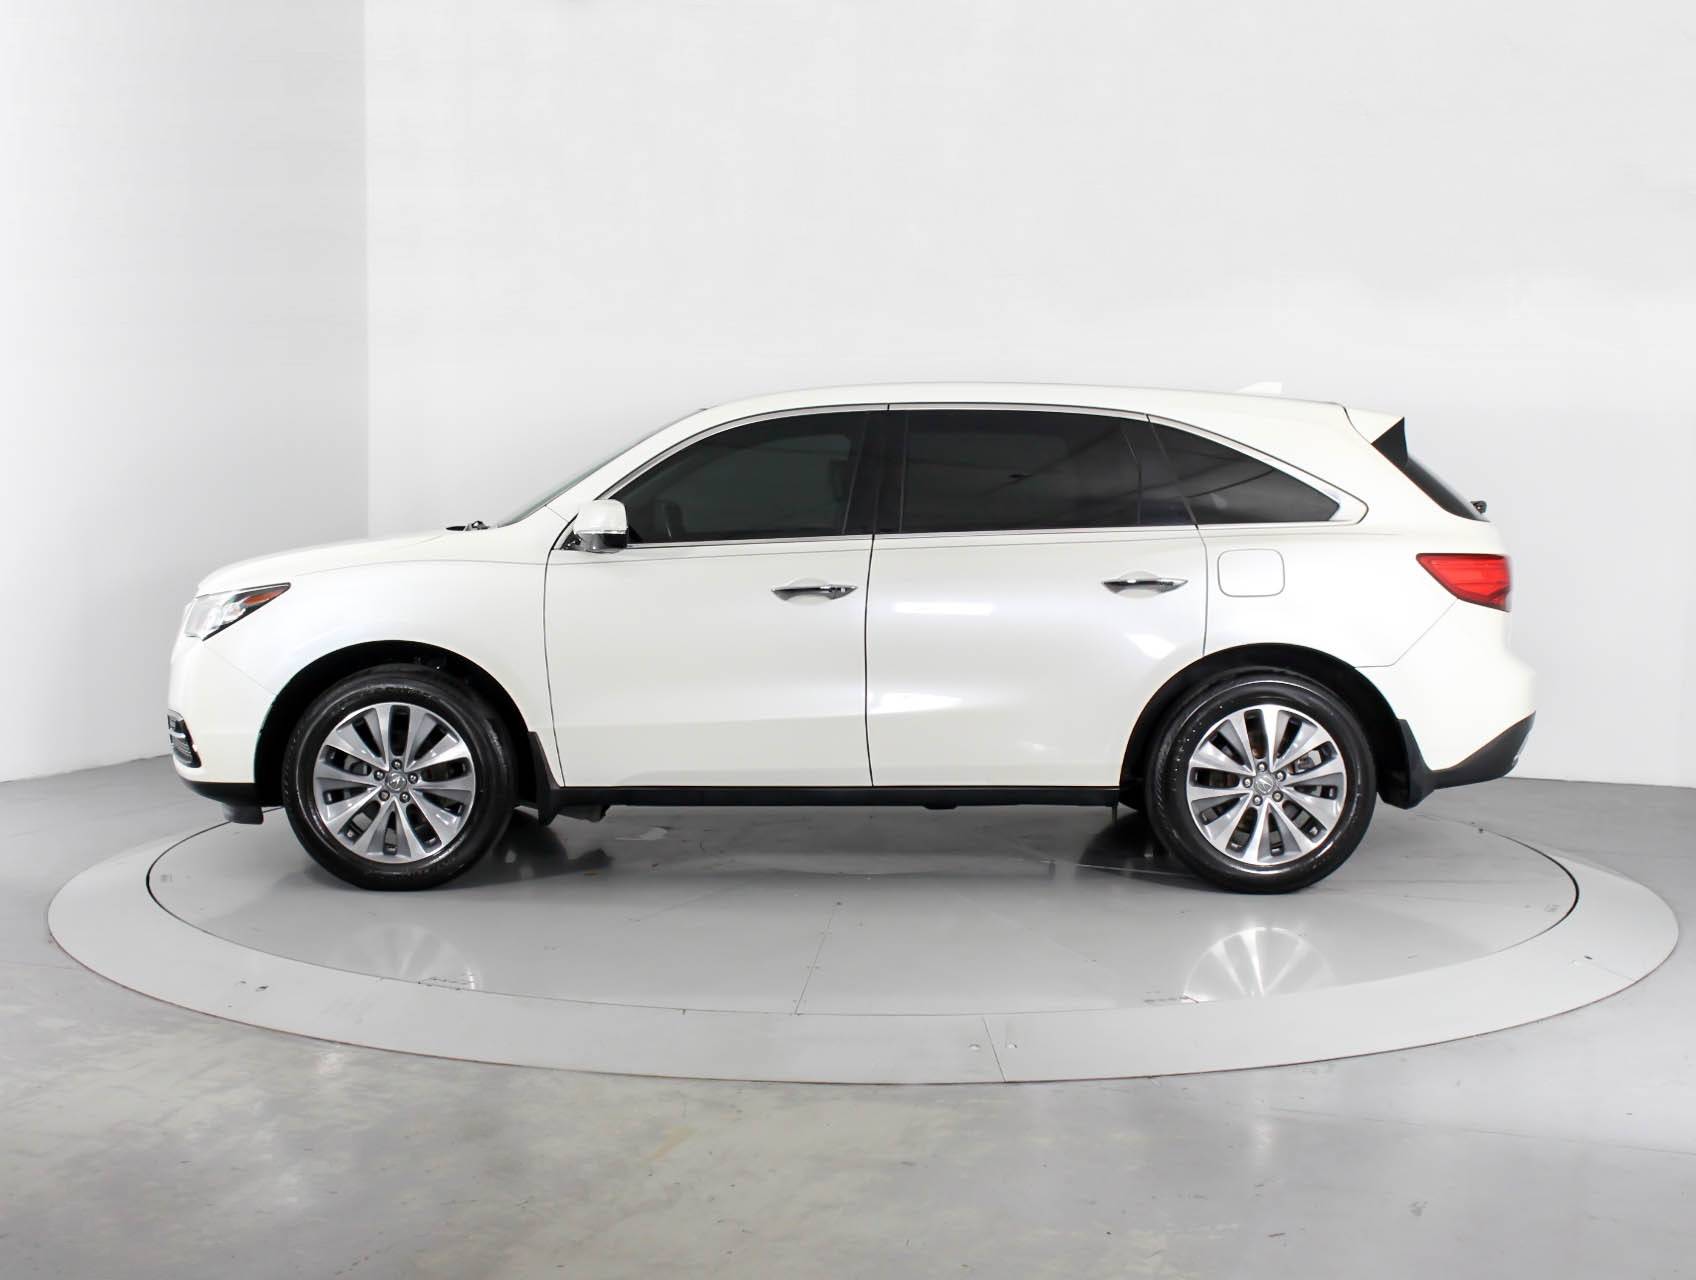 Florida Fine Cars - Used ACURA MDX 2014 WEST PALM TECHNOLOGY PACKAGE